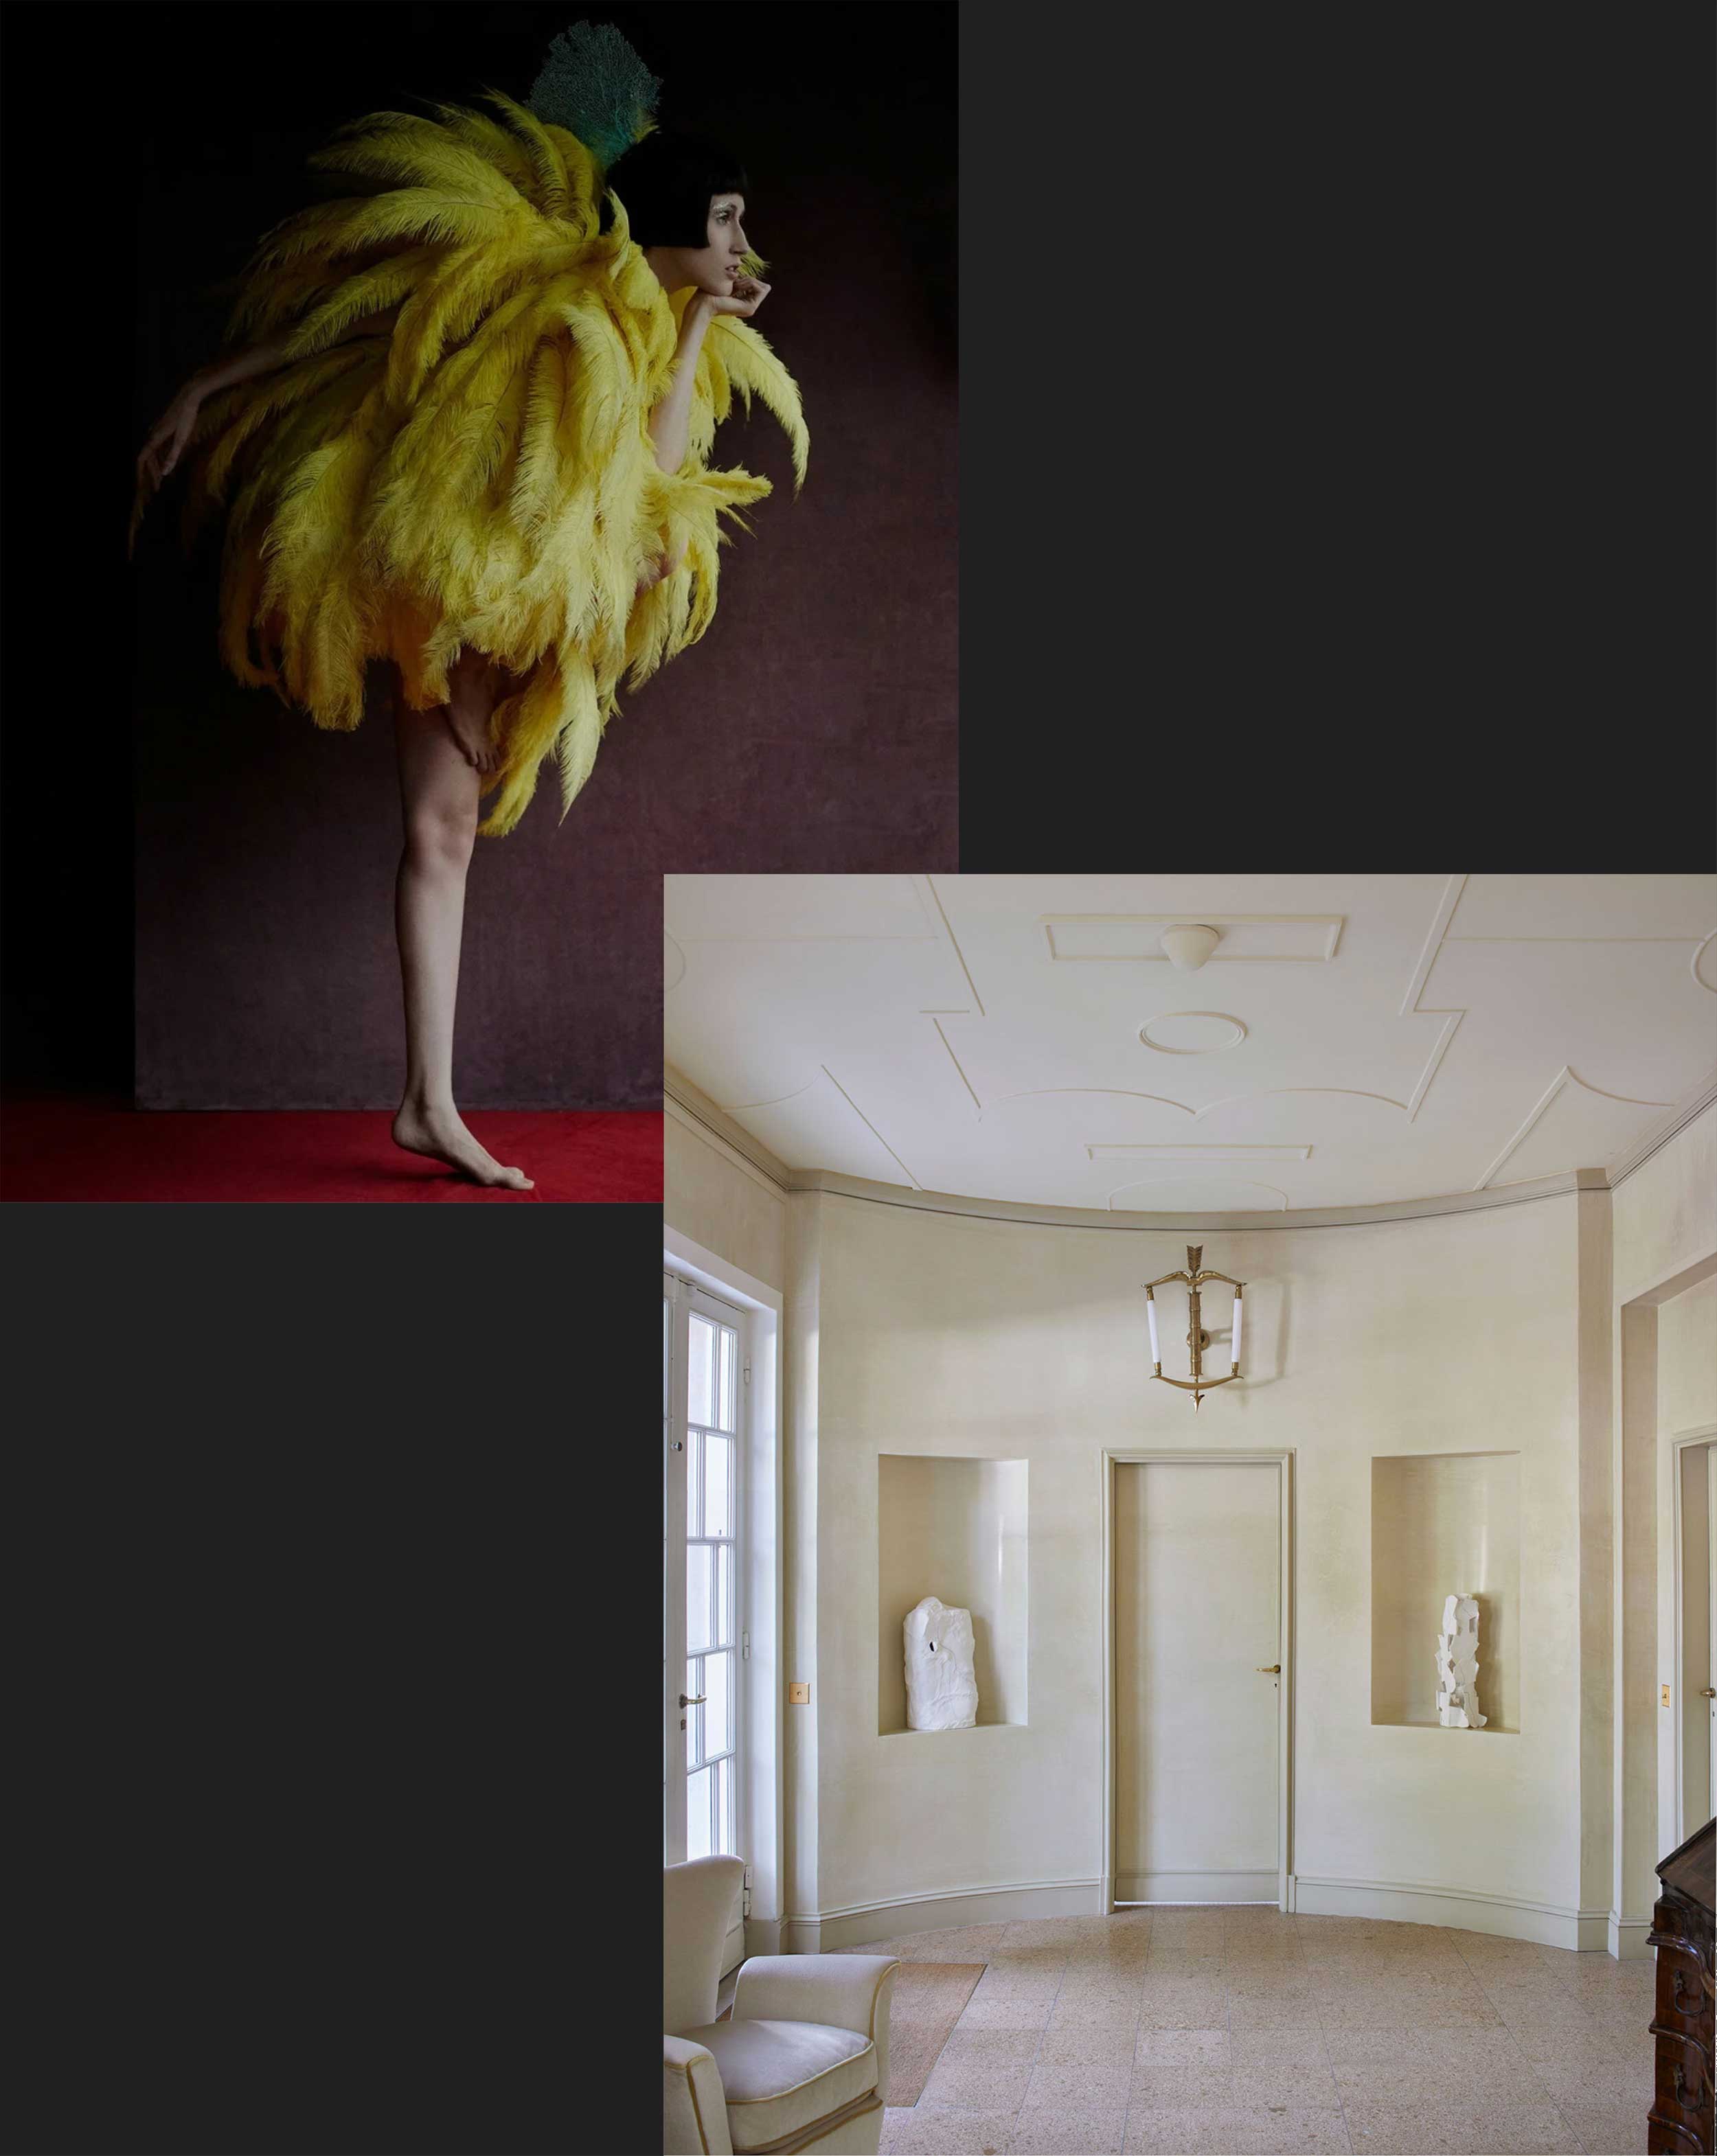 Collage of color photographs: a woman dressed in yellow feathers and a warm off-white circular room with small white sculptures set into the wall